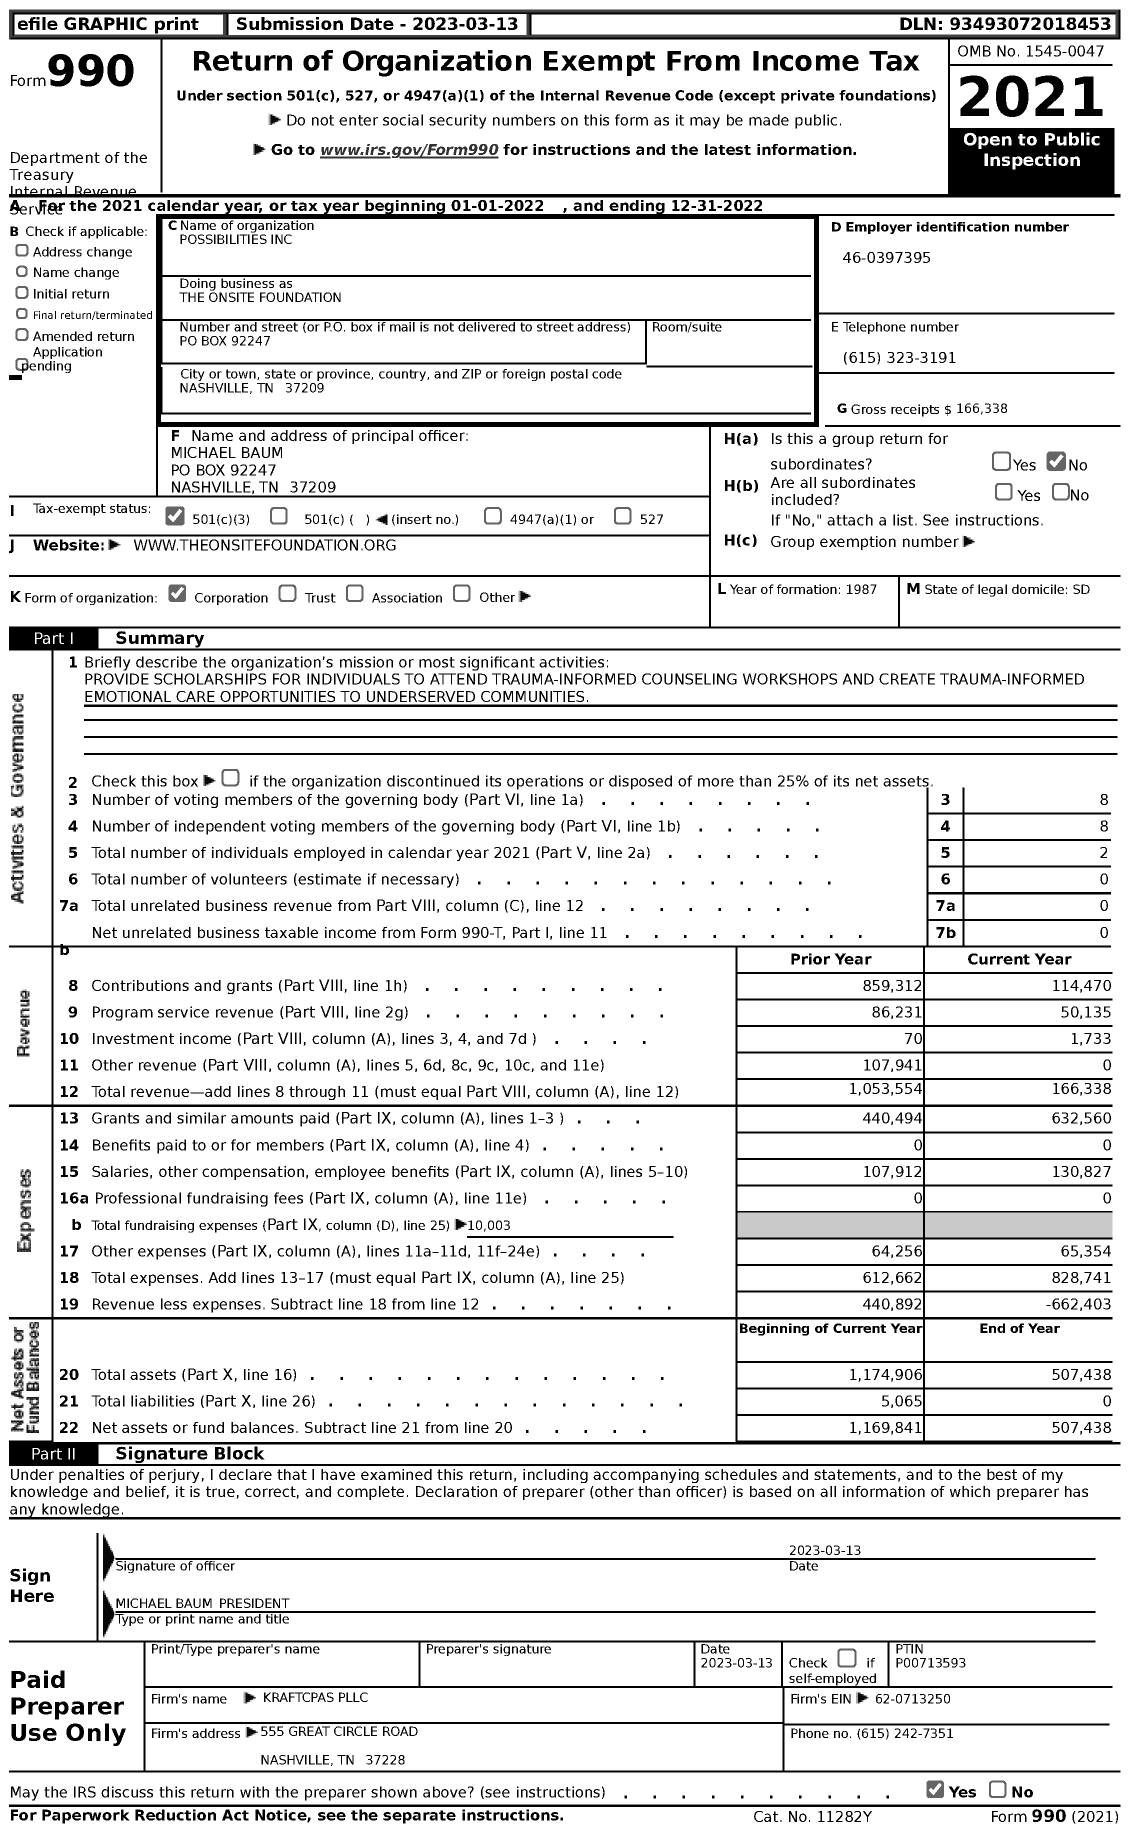 Image of first page of 2022 Form 990 for The Onsite Foundation